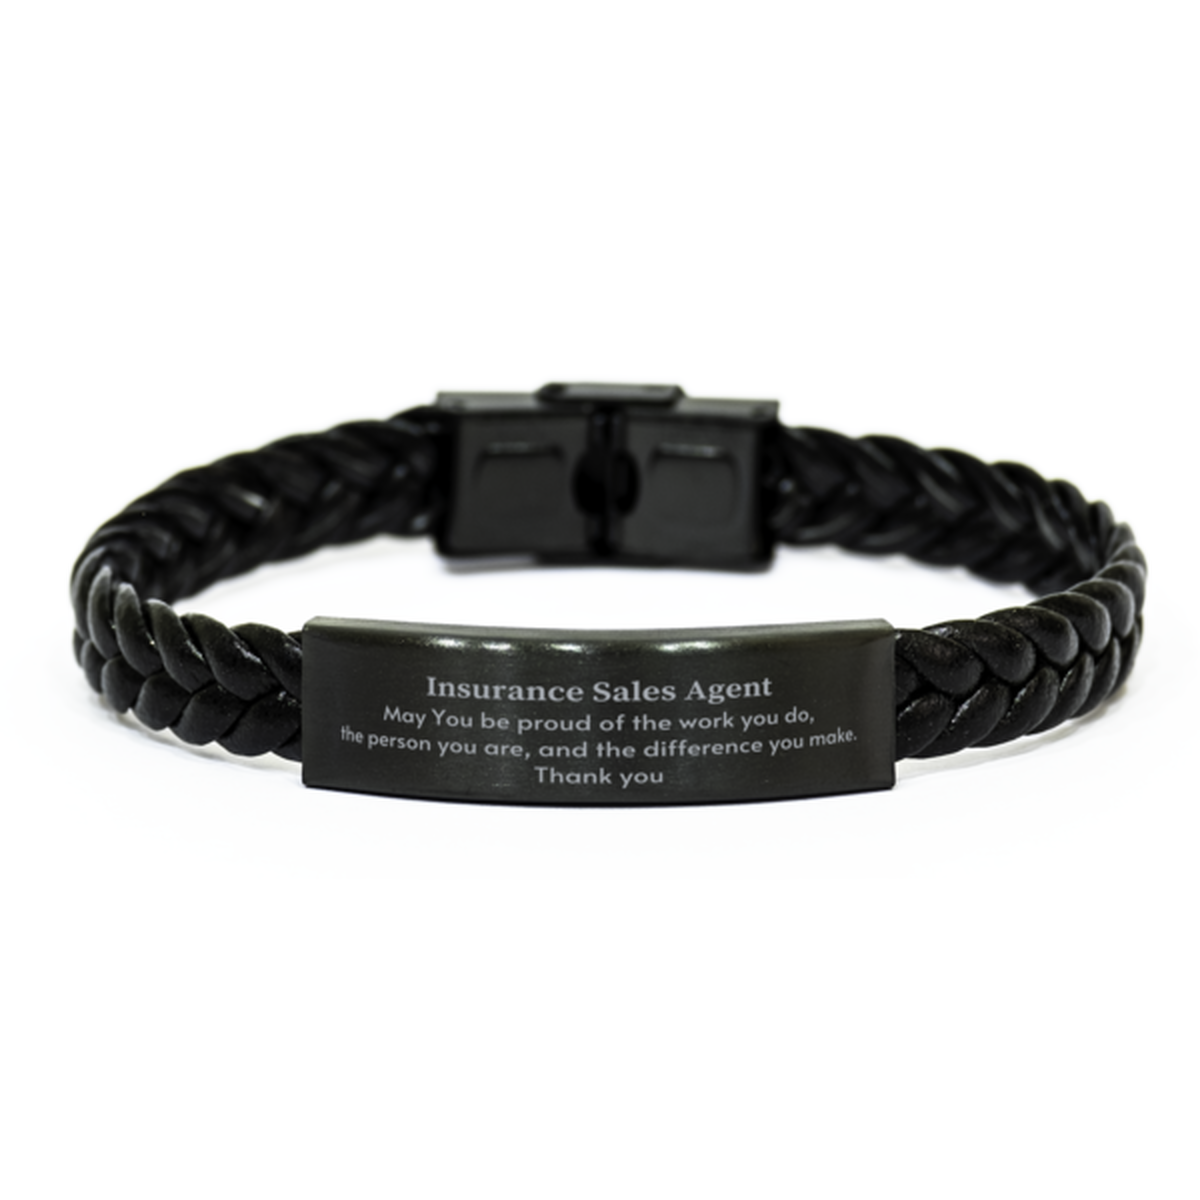 Heartwarming Braided Leather Bracelet Retirement Coworkers Gifts for Insurance Sales Agent, Insurance Sales Agent May You be proud of the work you do, the person you are Gifts for Boss Men Women Friends